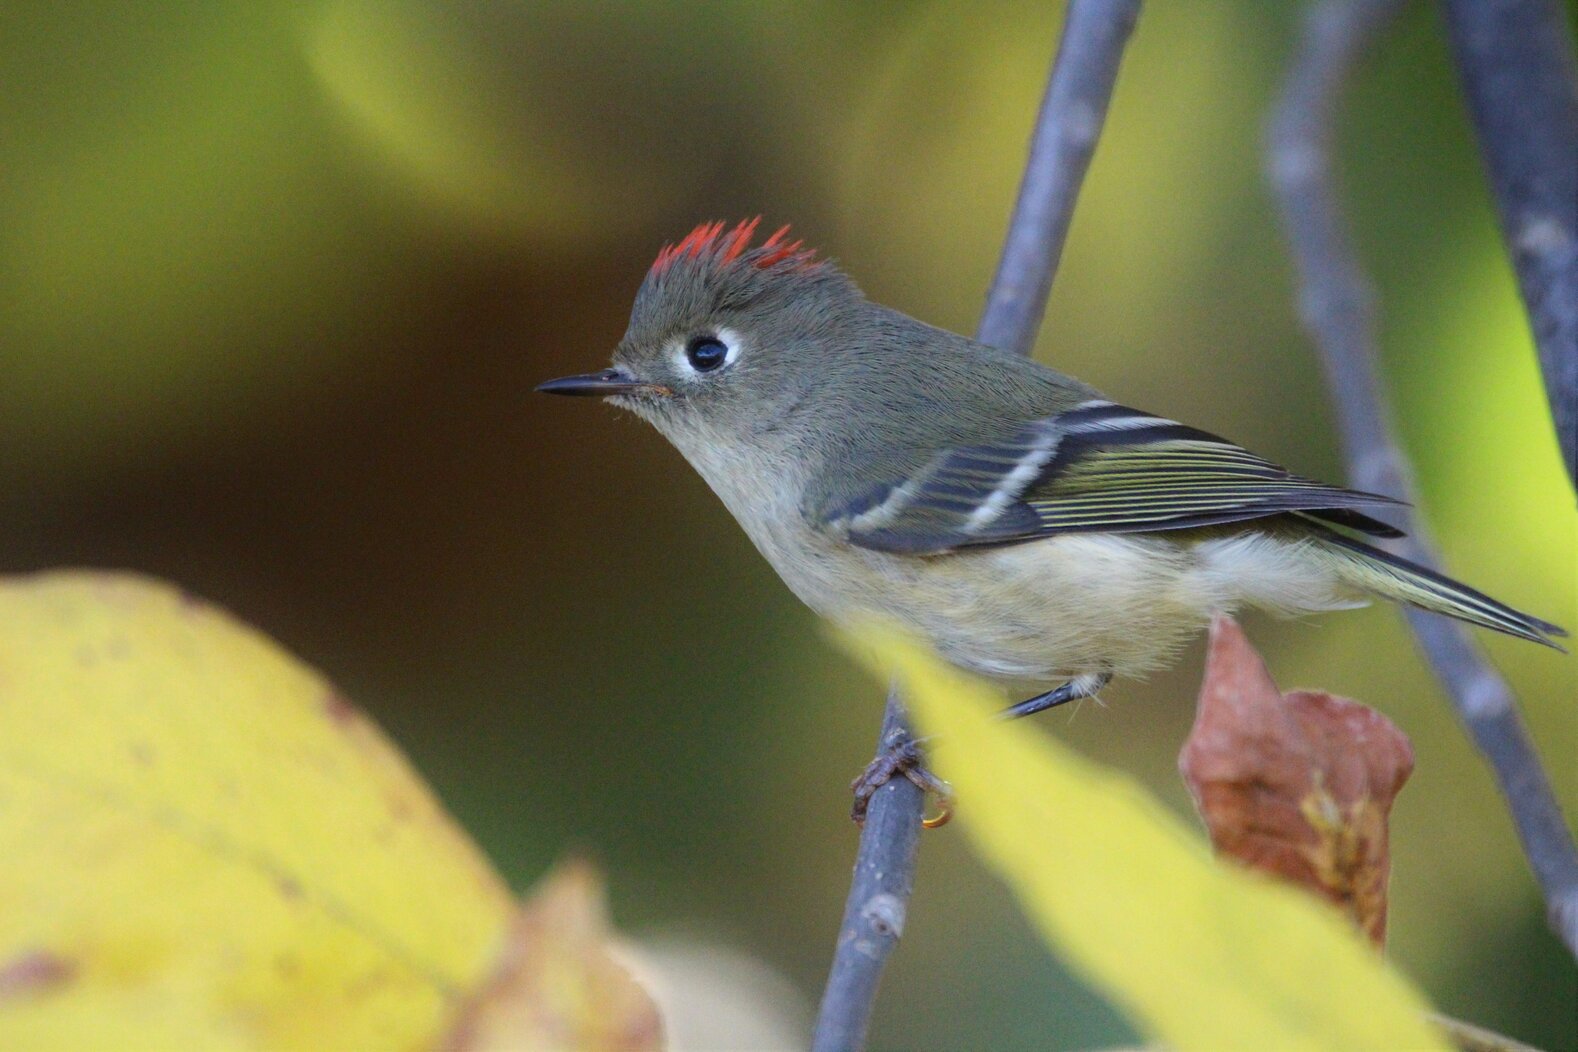 The male Ruby-crowned Kinglet’s colorful head patch is raised into a ragged crest when the tiny bird is excited, often when the bird is singing or scolding. Photo: <a href="https://www.flickr.com/photos/89780664@N05/" target="_blank">Dave Ostapiuk</a> 